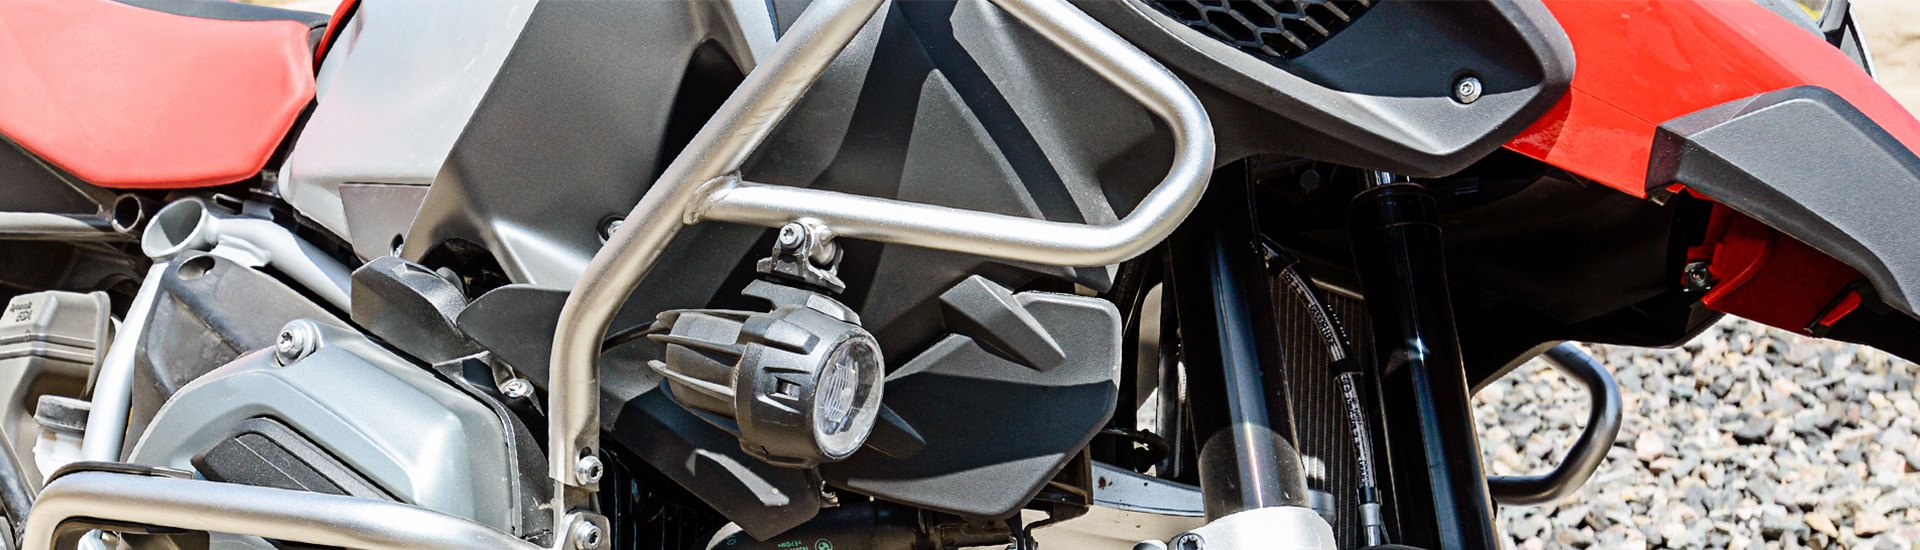 Motorcycle Guards & Protections